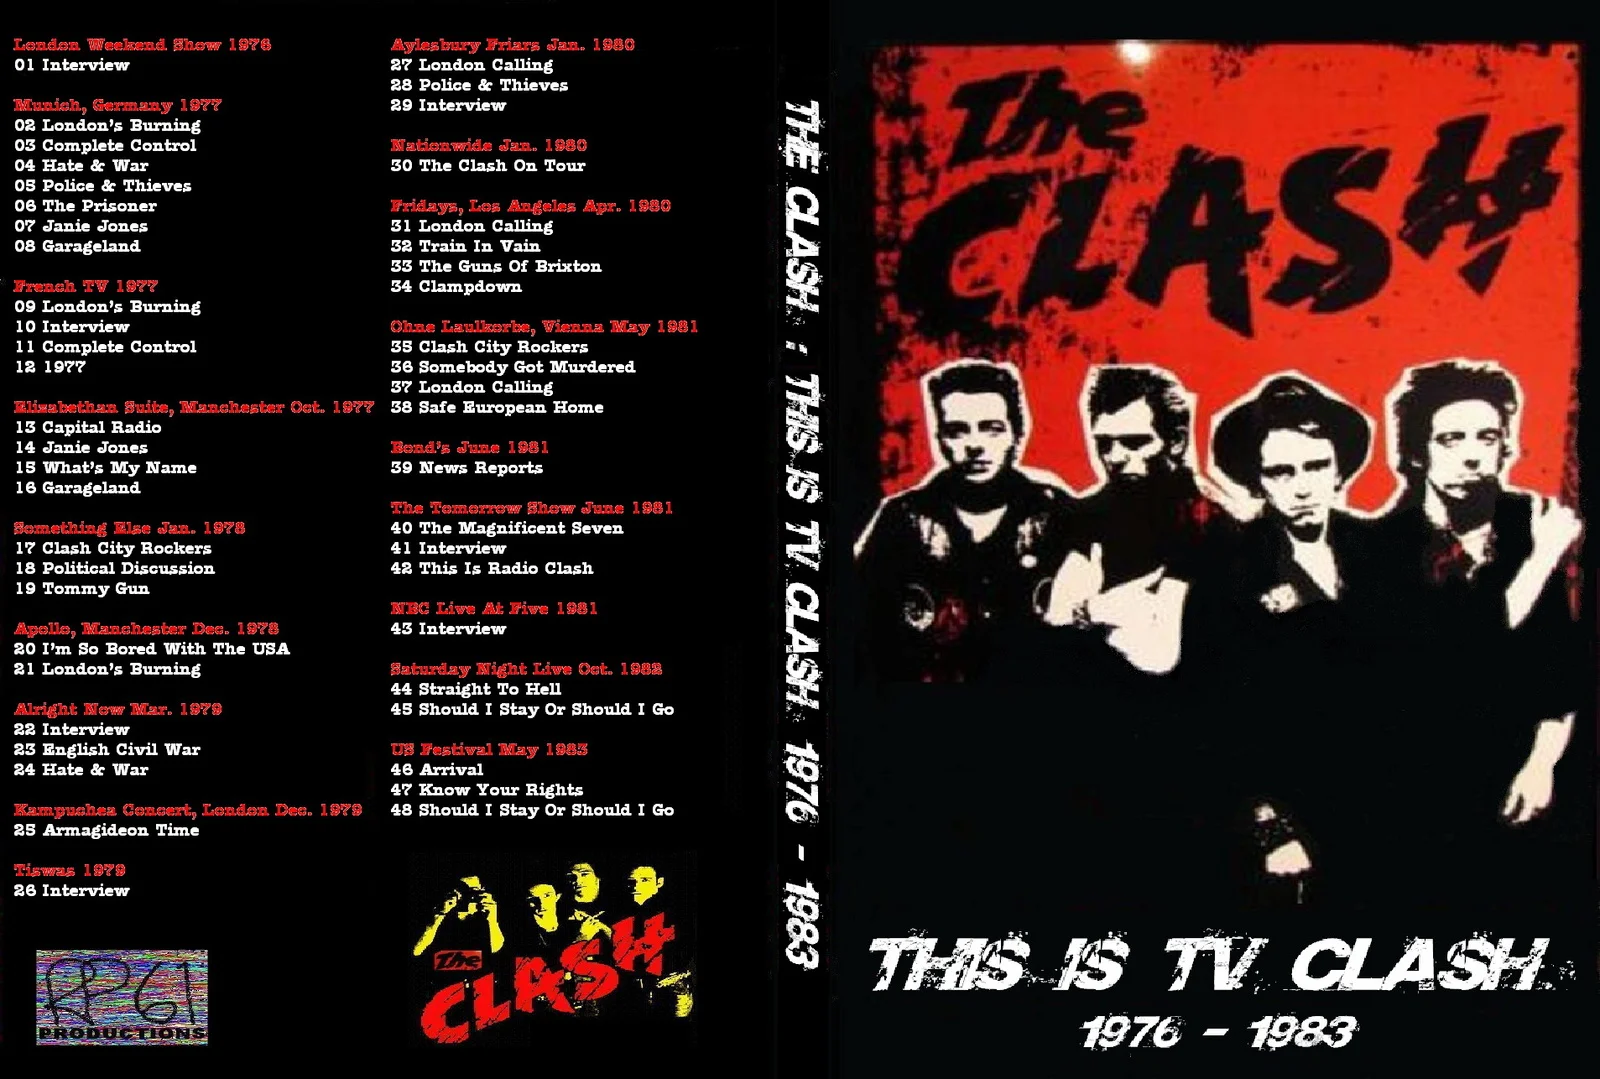 The Clash Live on TV 1976-1983 DVD Rare Pro-Shot Compilation This is TV ... - $20.00